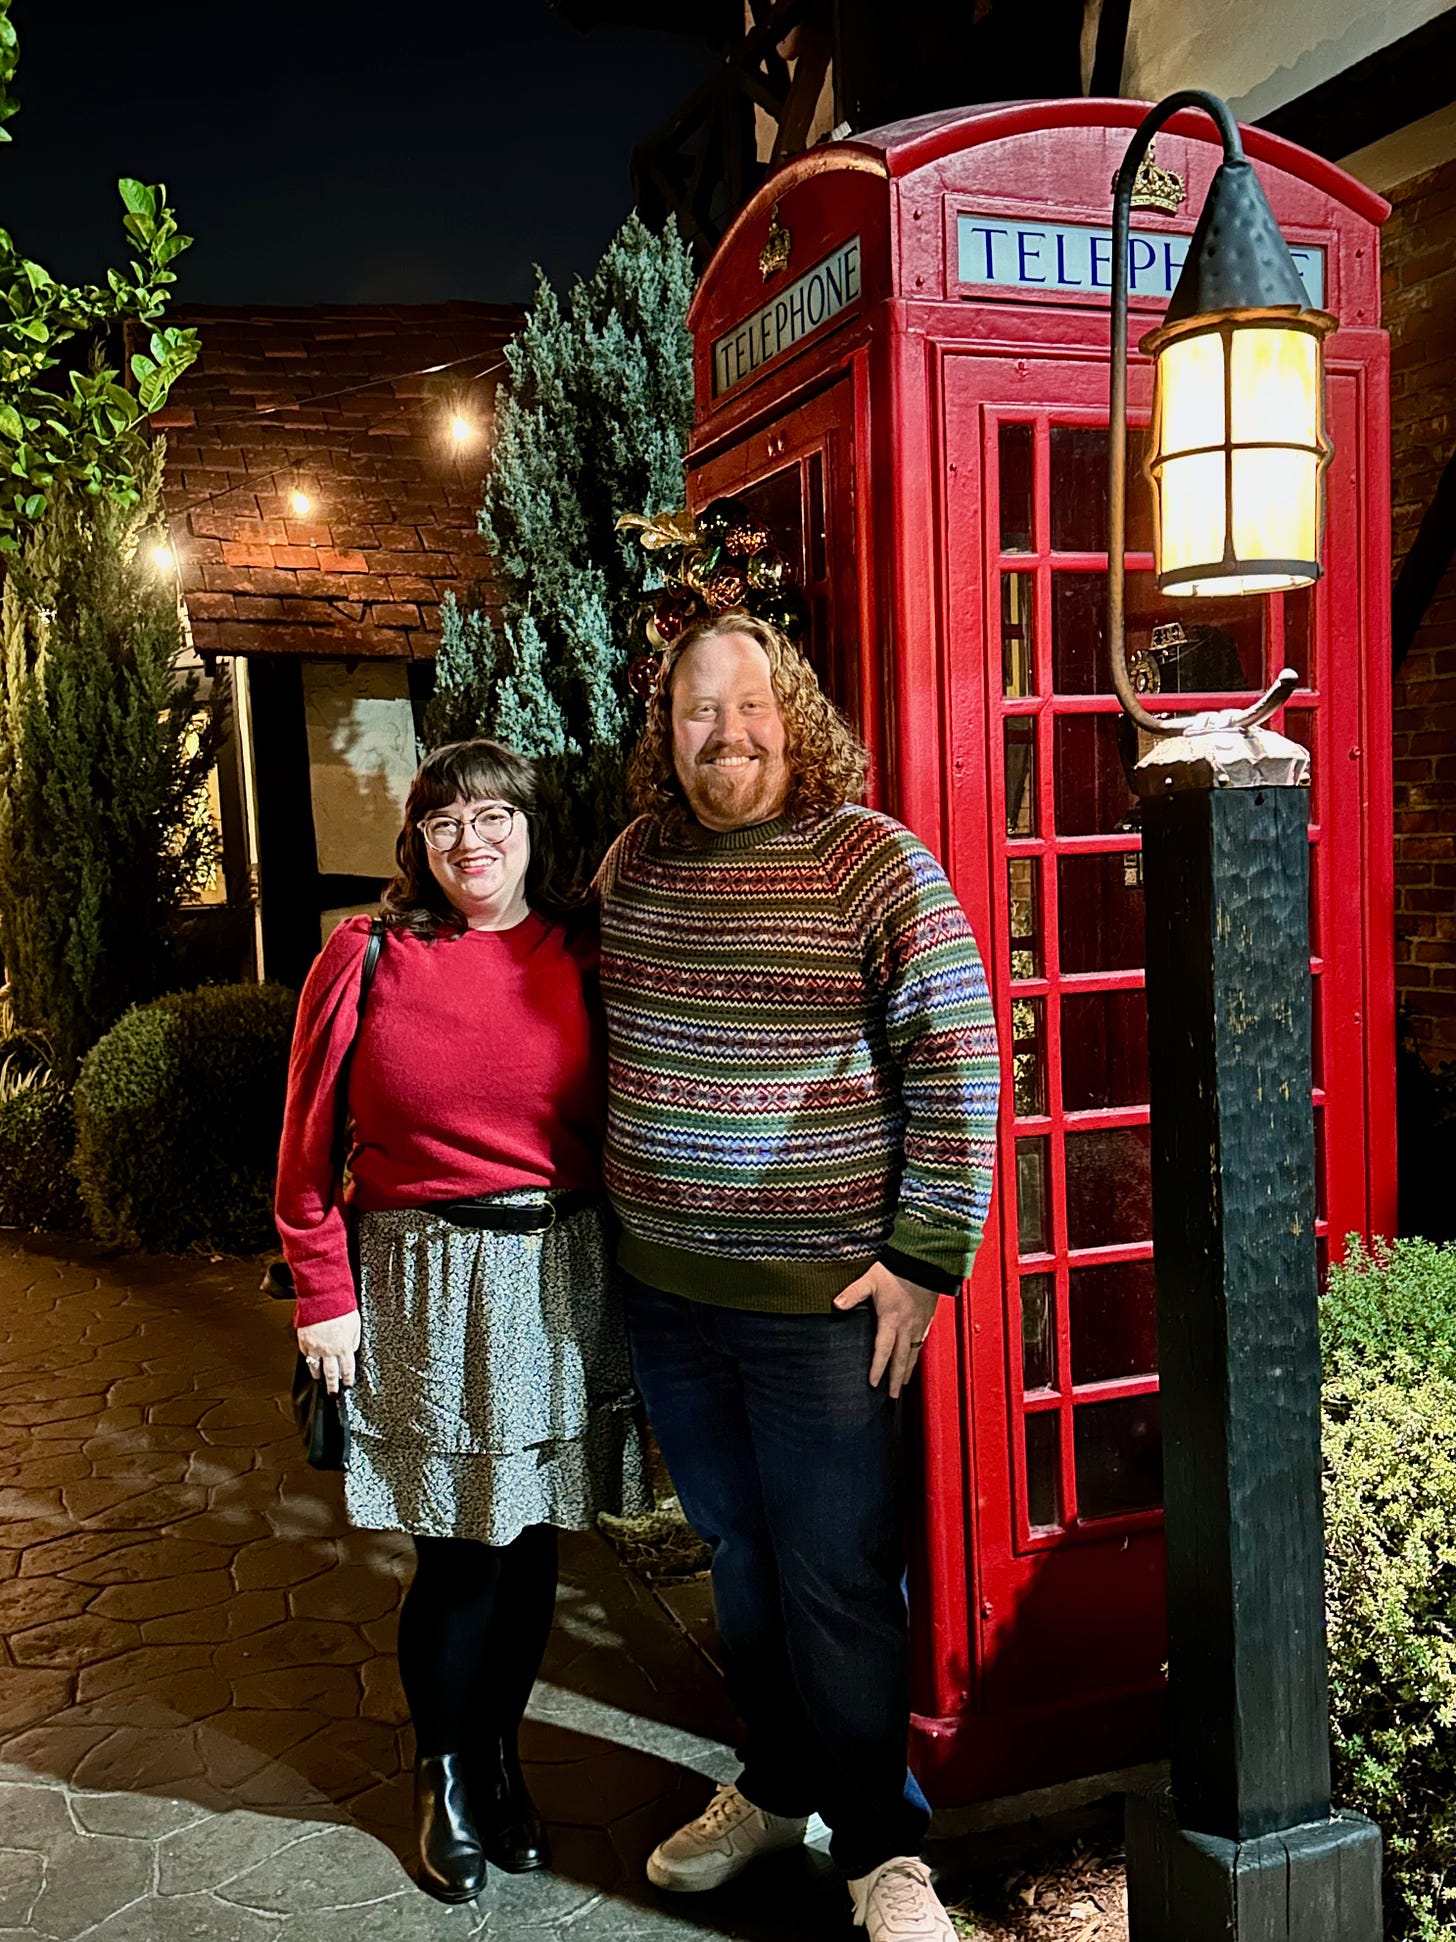 Photo at nighttime of Mike and me outdoors in front of a red telephone booth. I am wearing a red cashmere sweater, black and white skirt, black tights, and black boots. Mike is wearing a red white and green sweater, blue jeans, and white sneakers.